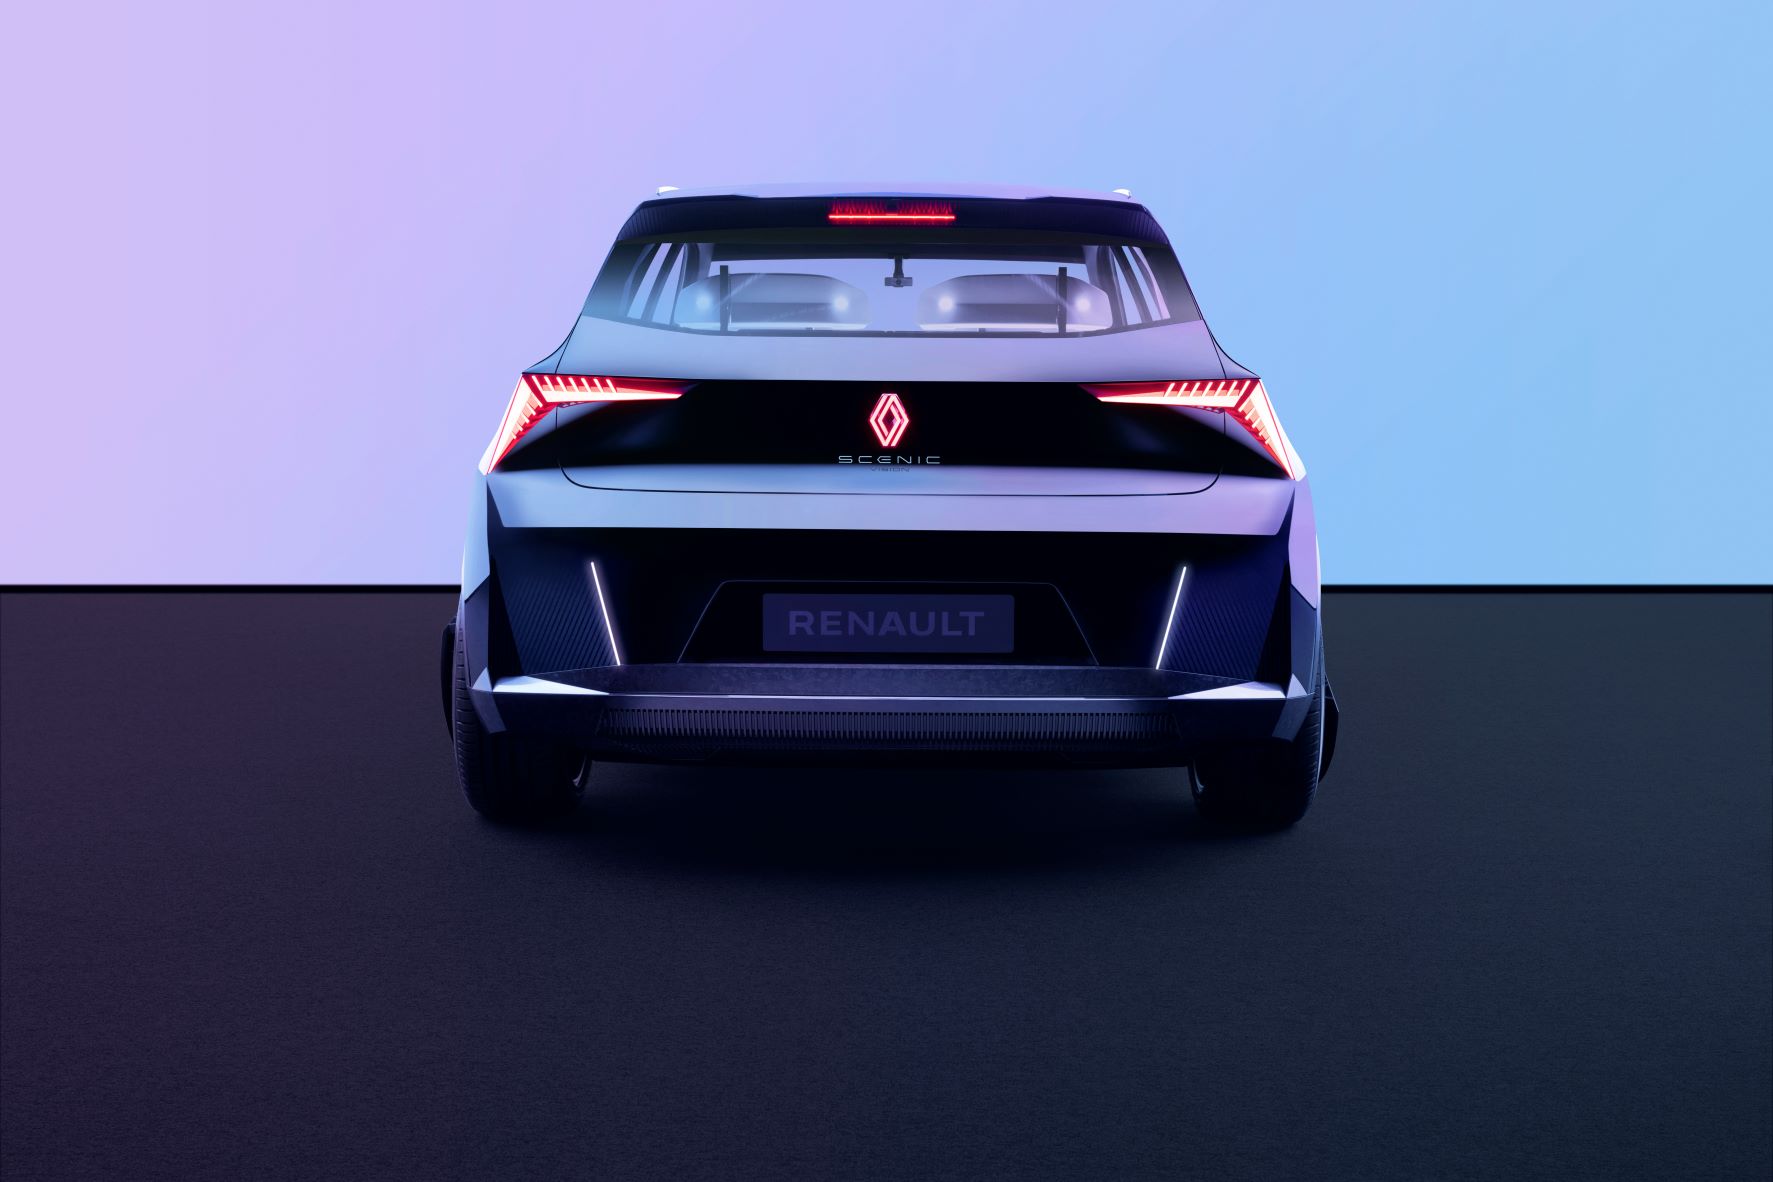 Rear view of the Renault Scenic Vision concept